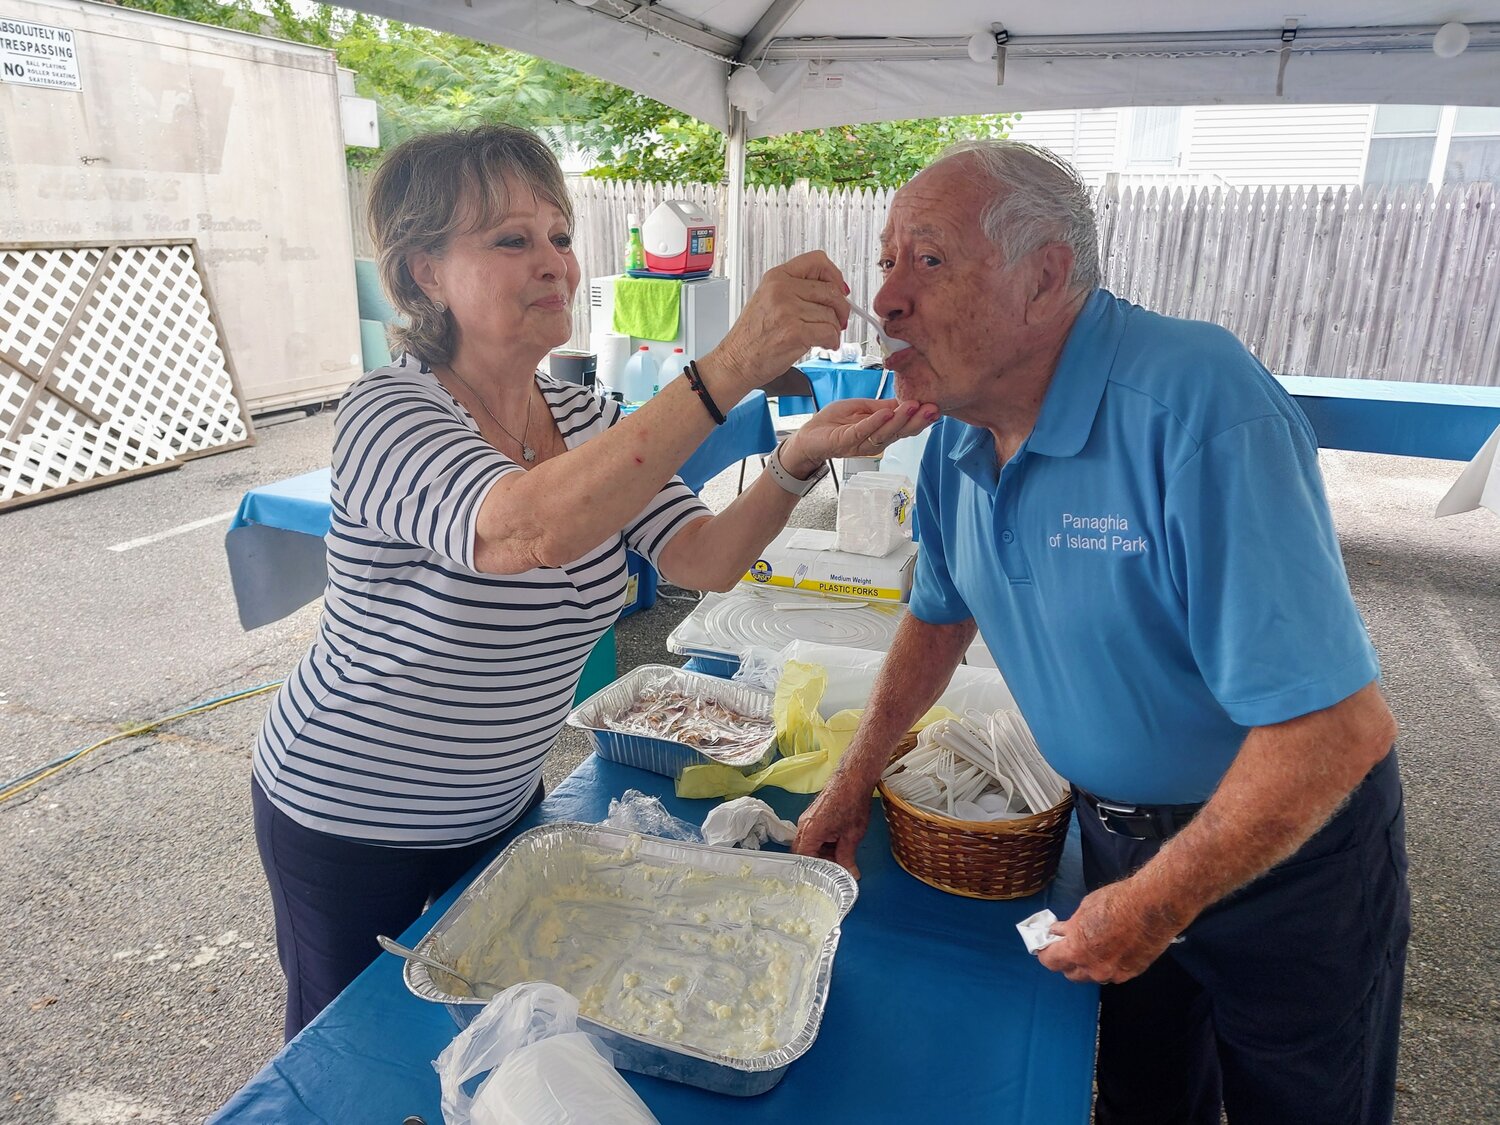 Christina and Christos Papadopoulos enjoyed the Greek cuisine found at the annual Island Park festival.